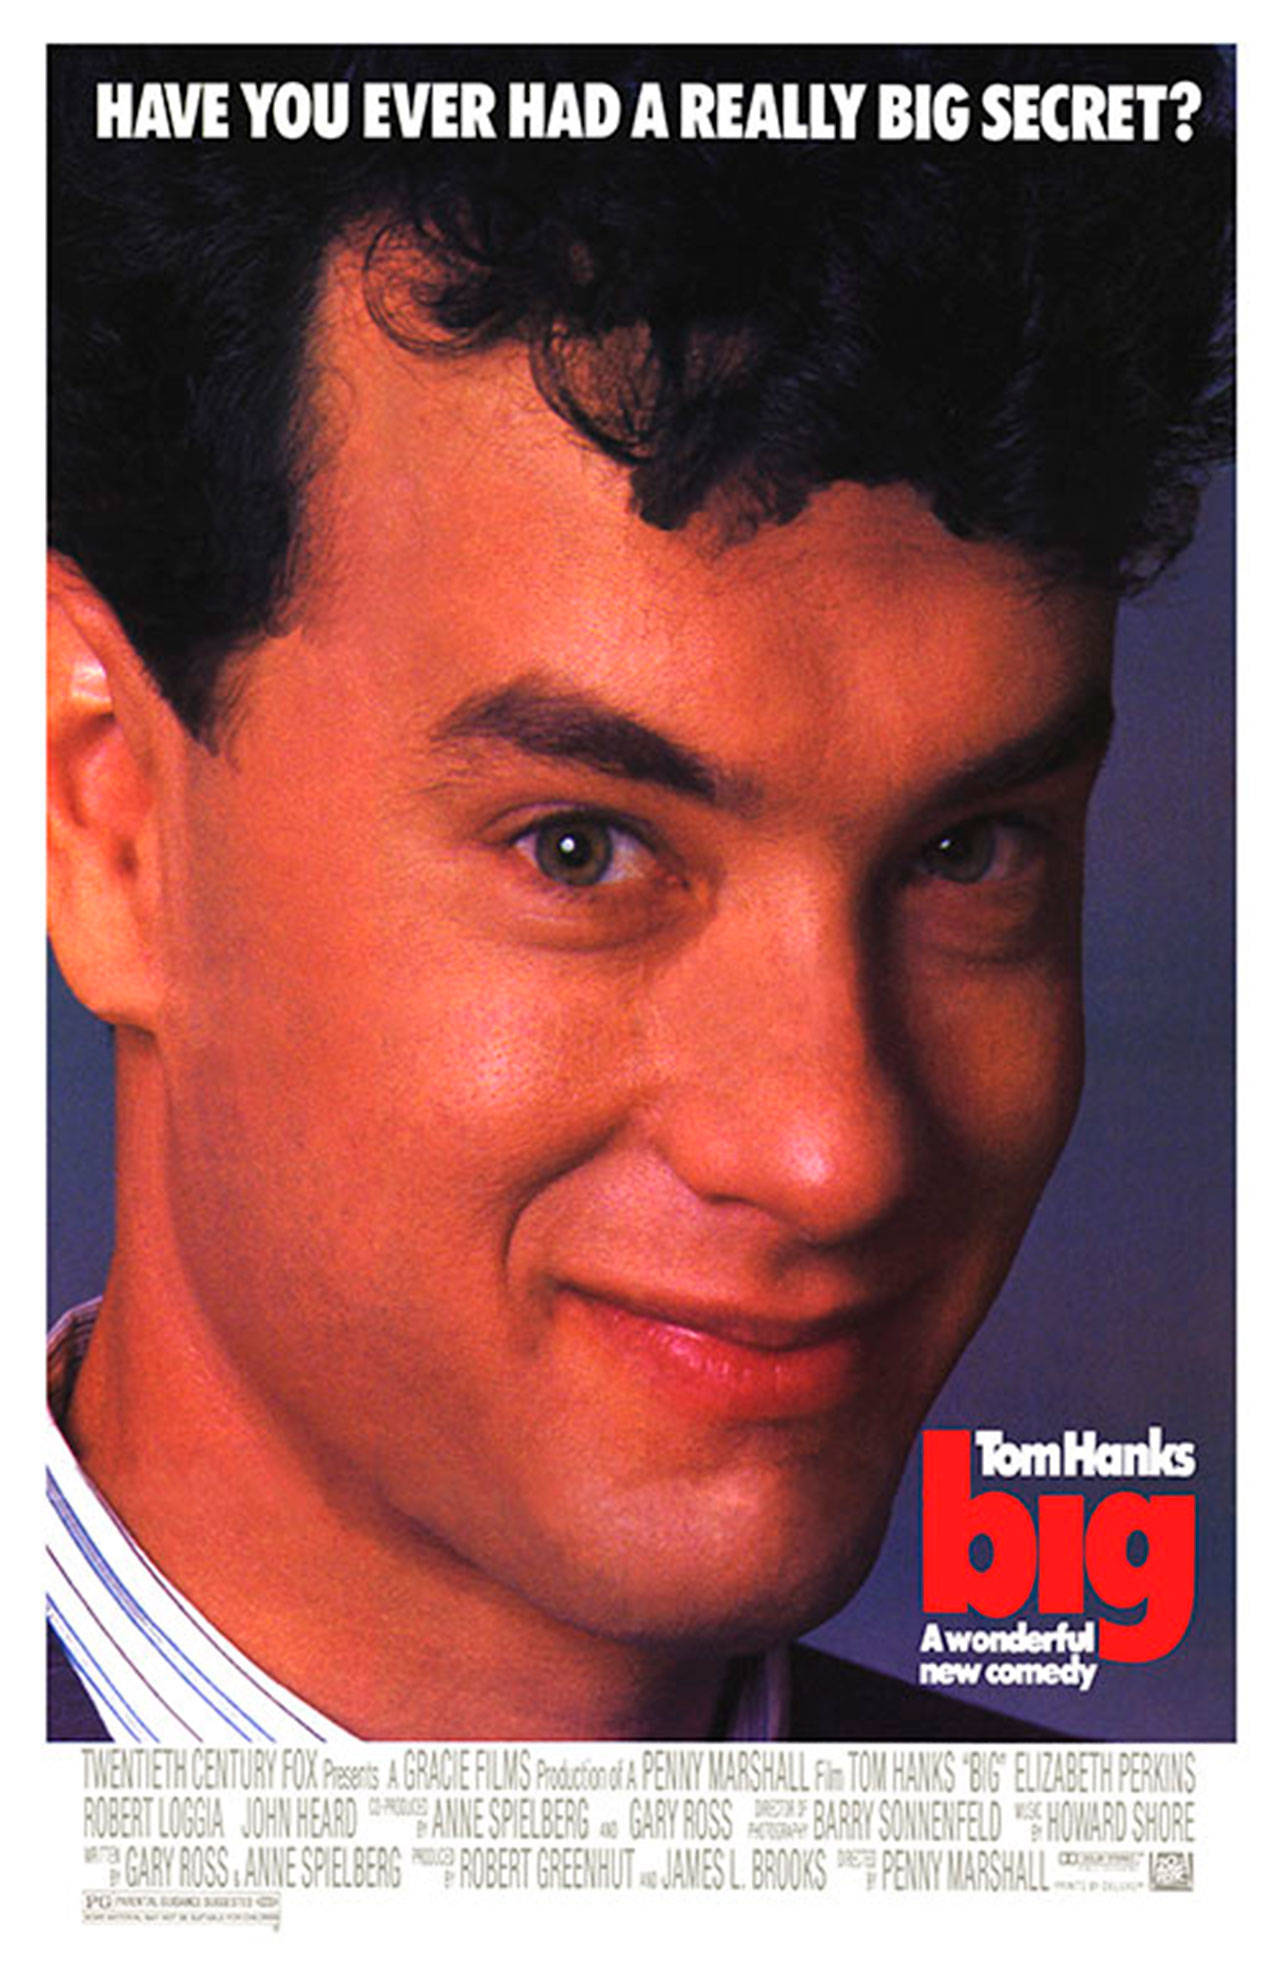 Image courtesy of 20th Century Fox | “Big” will be back up on the big screen for a special 30th anniversary revival at 7 p.m. Wednesday, July 18 at Bainbridge Cinemas.